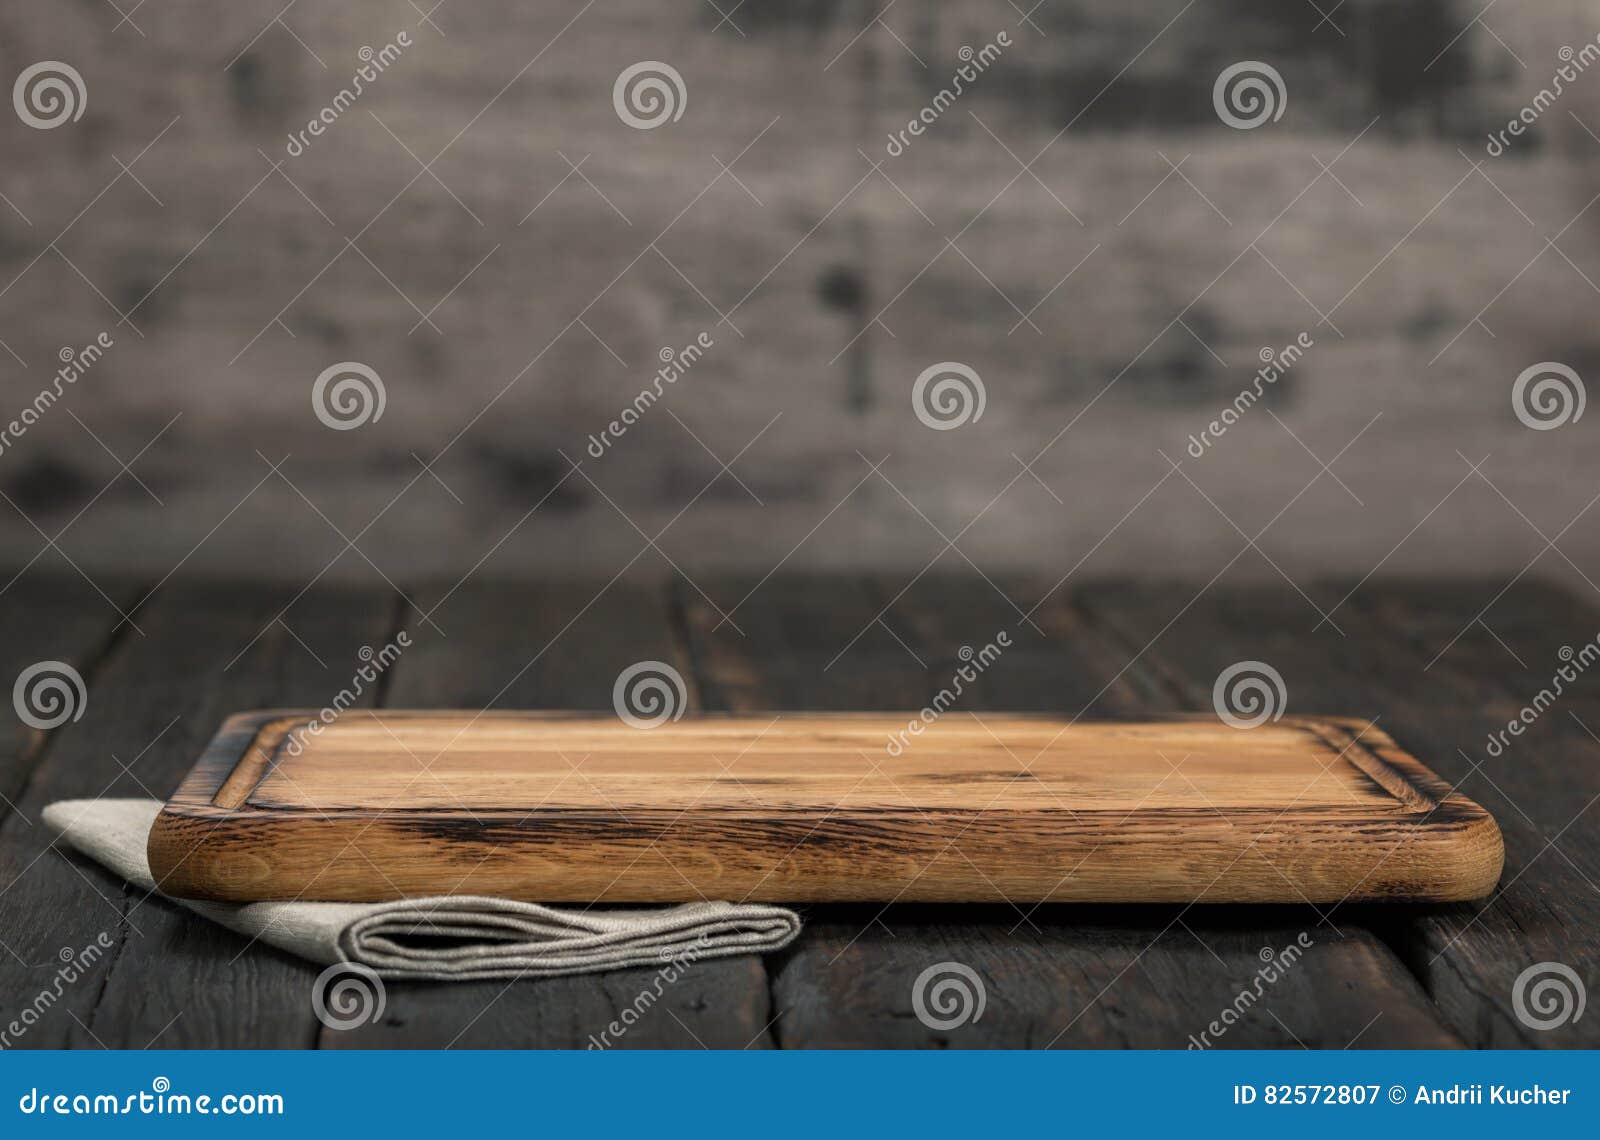 chopping board on dark wooden background close up